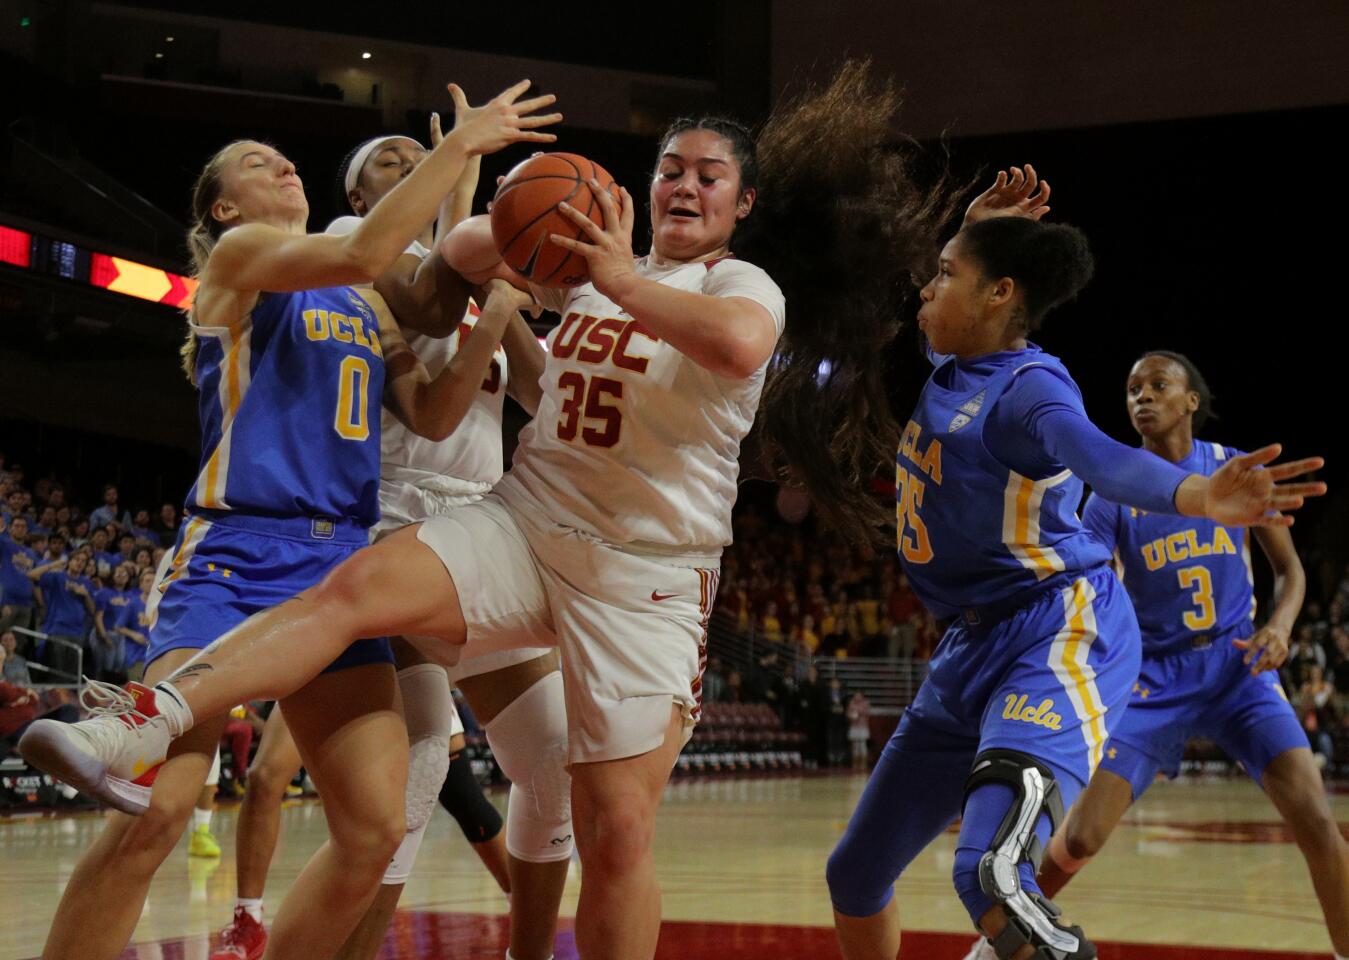 USC forward Alissa Pili (35) boxes out UCLA guards Chantel Horvat (0) and Camryn Brown (35) to grabs a defensive rebound during the first half of a game Jan. 17 at Galen Center.